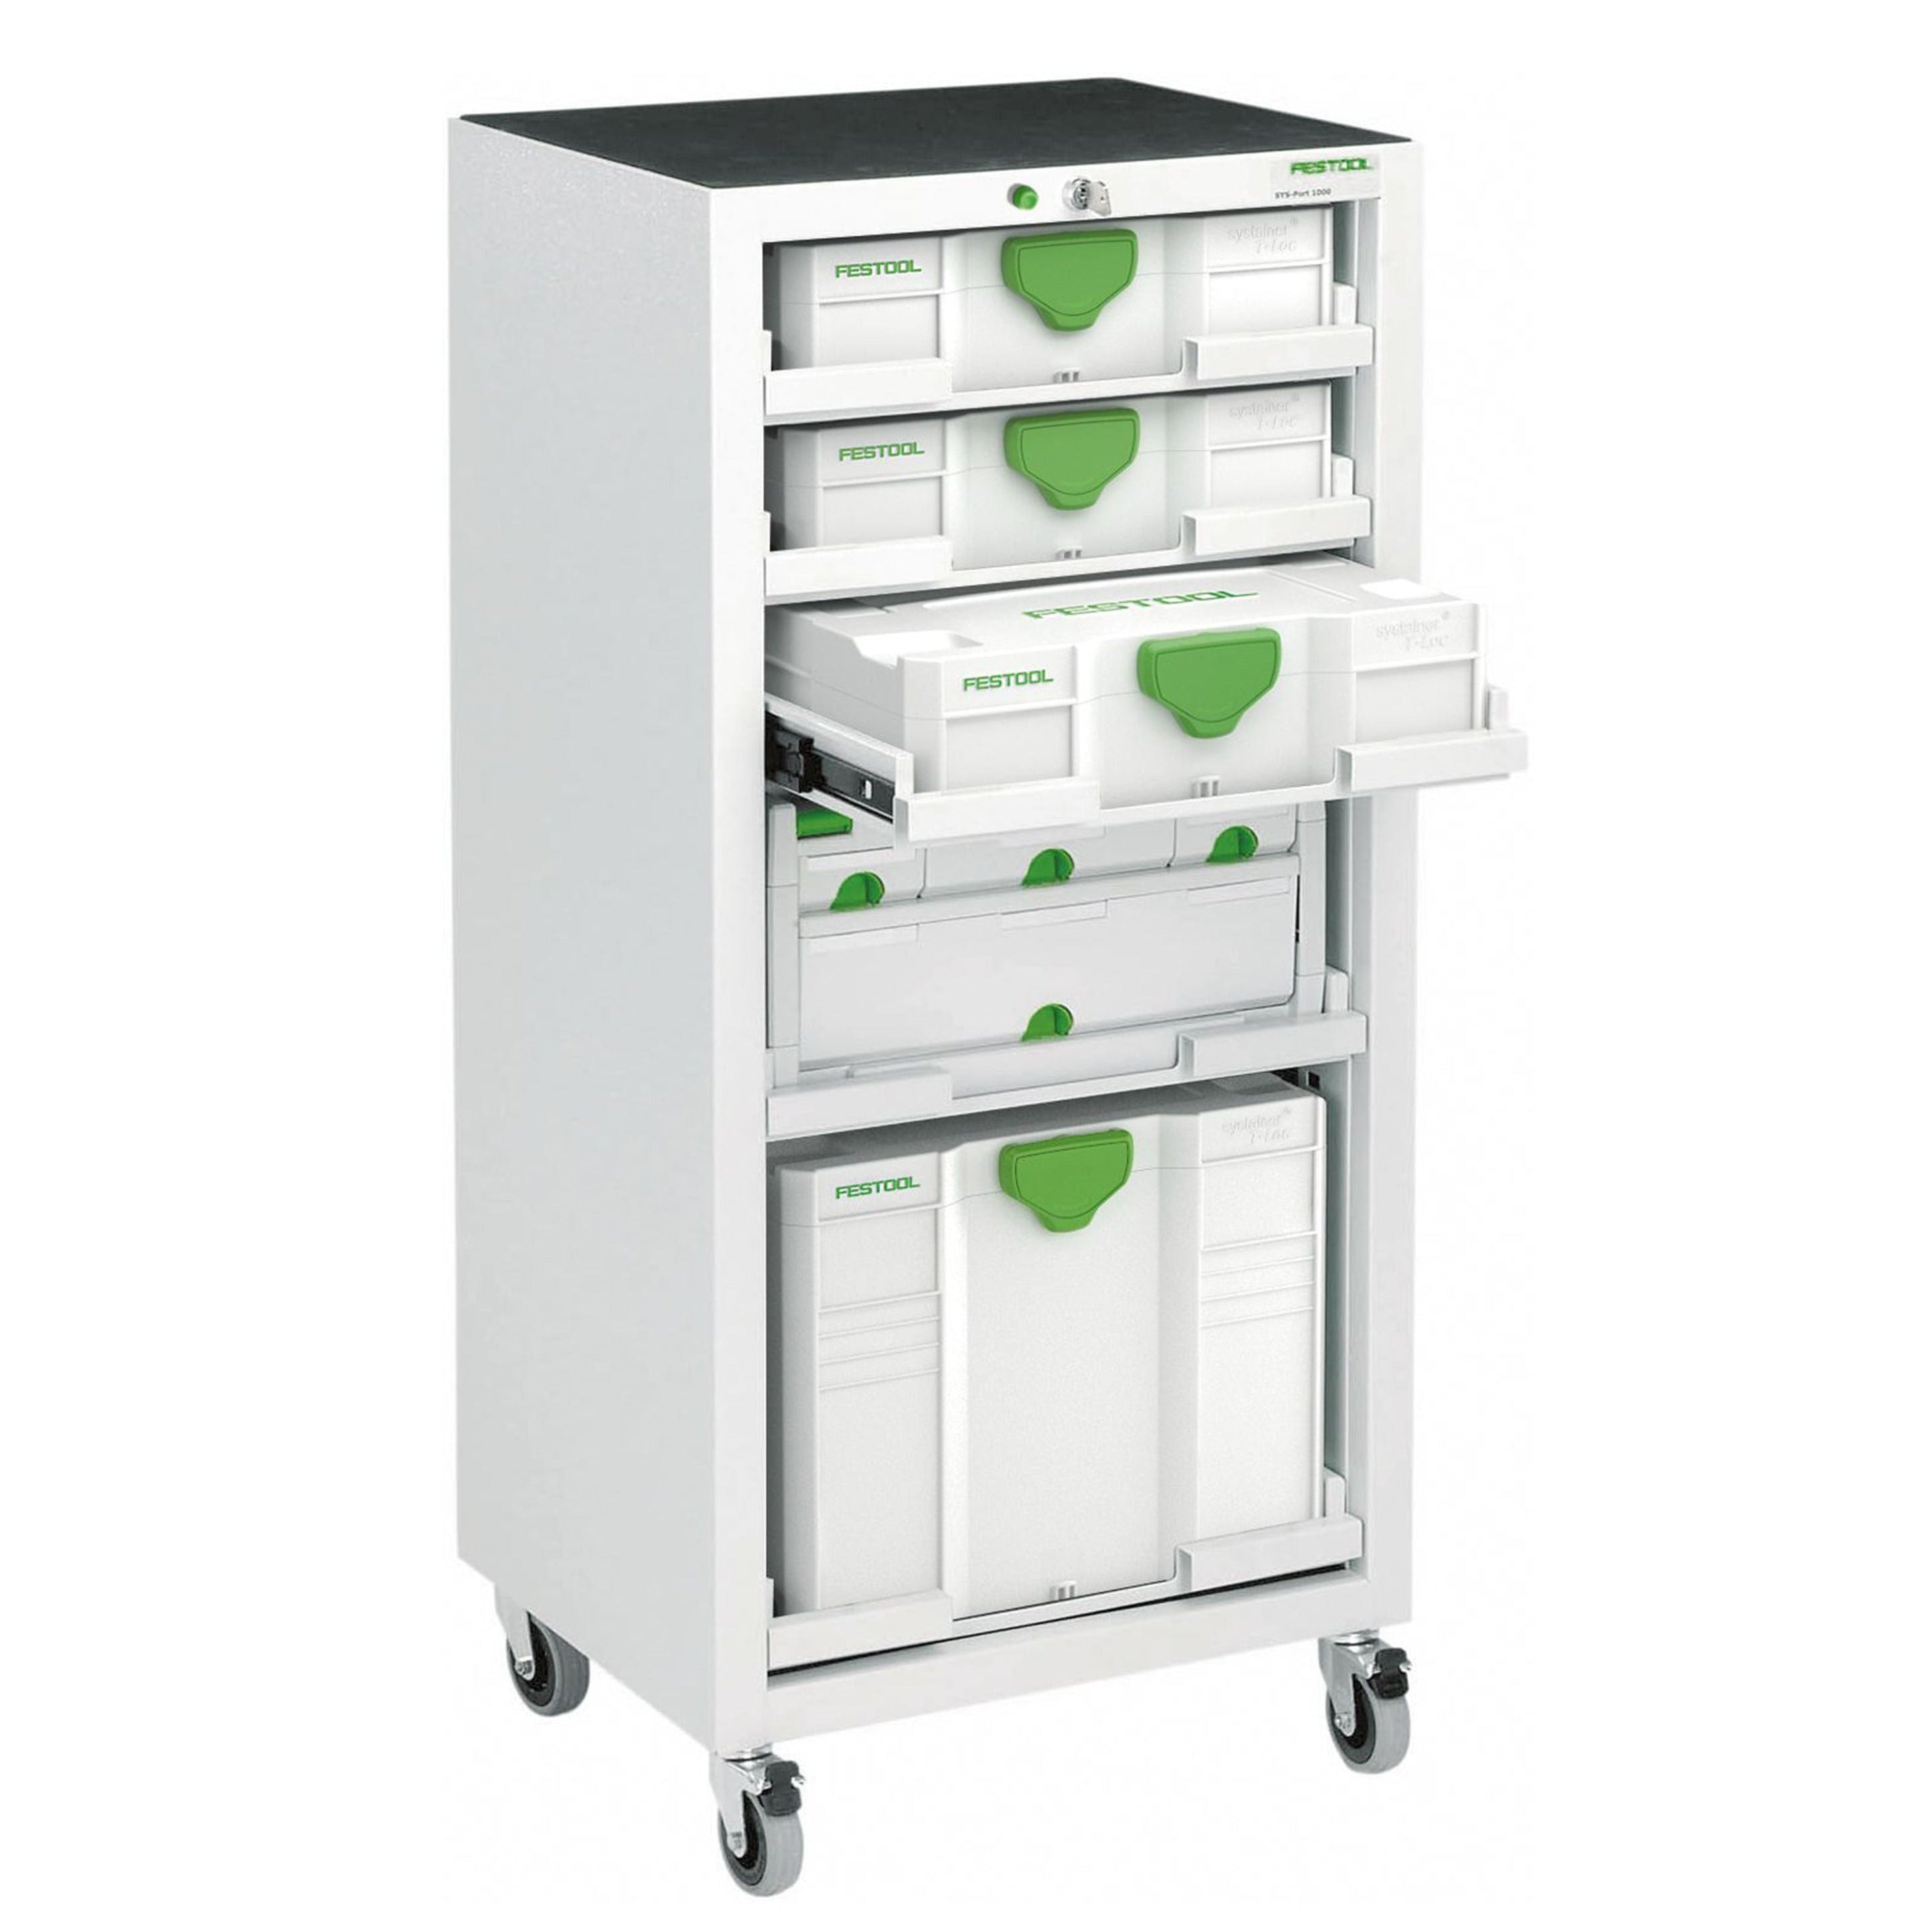 SYS-PORT 5 Drawer Mobile Systainer Storage 491922 by Festool